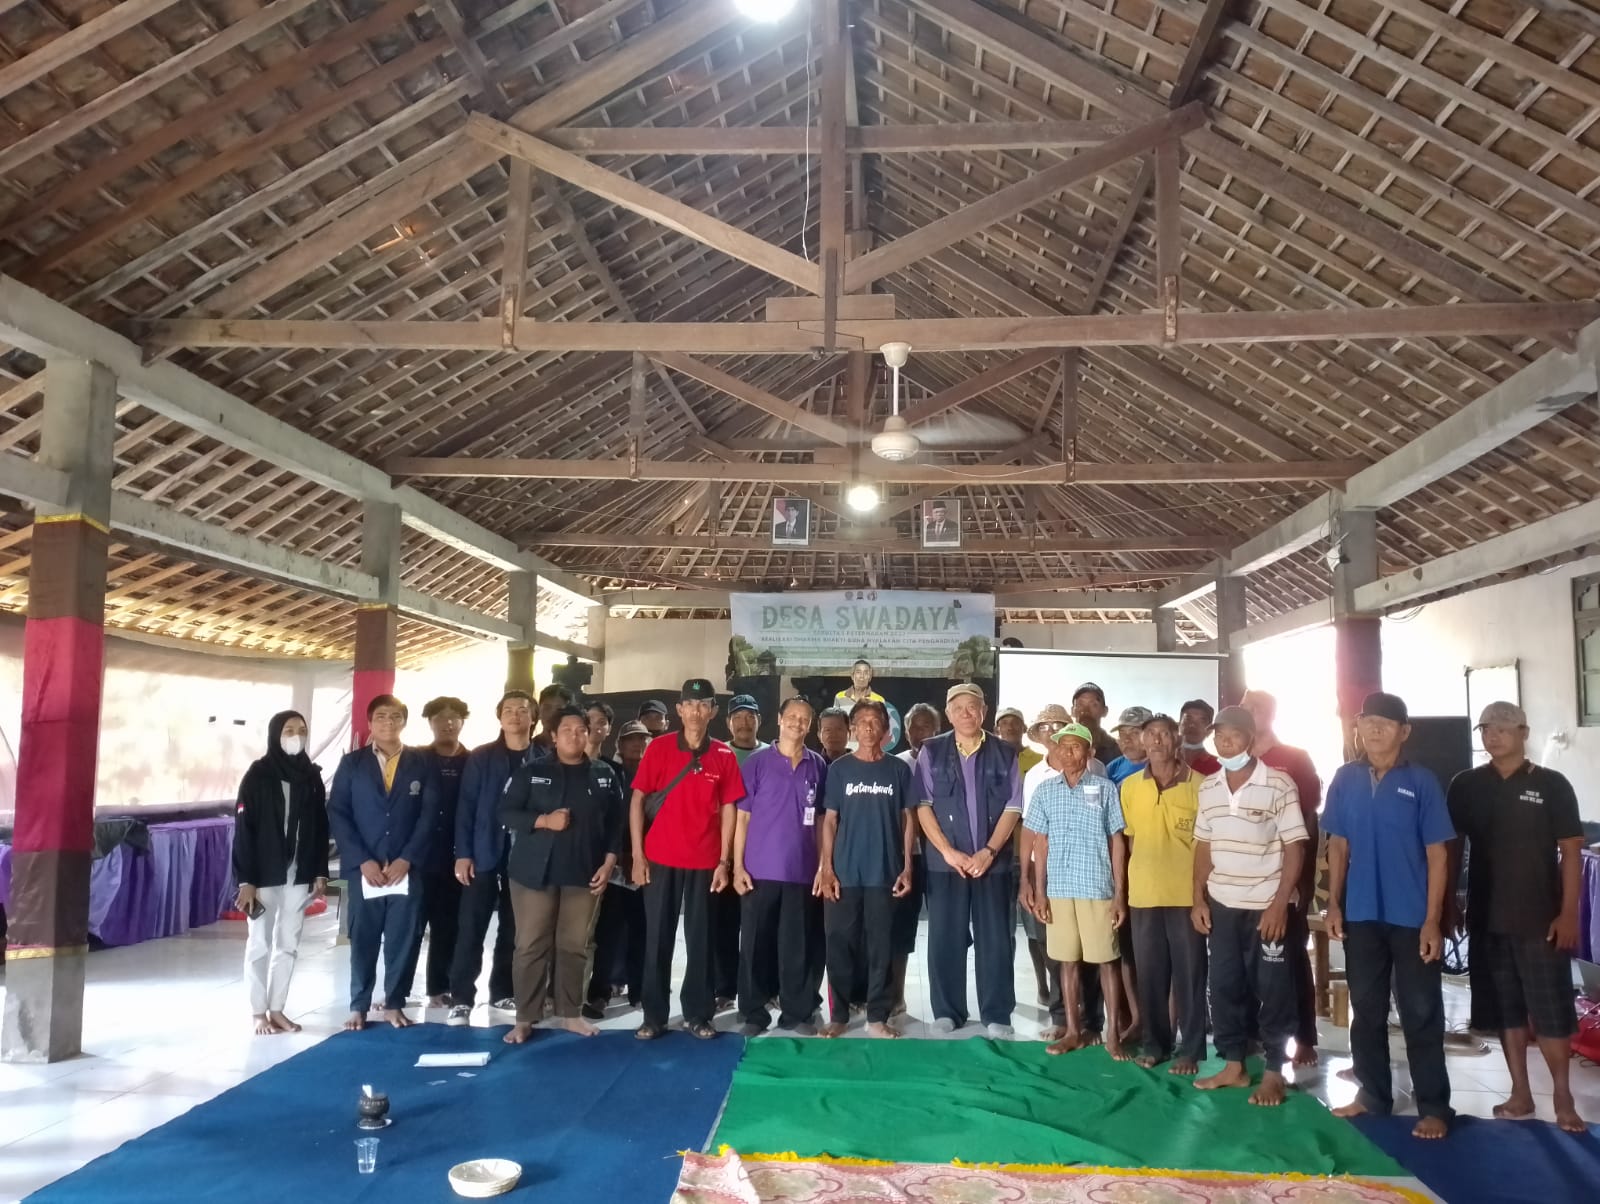 BEM-KM FAPET UNUD HELD STS SOCIALIZATION AND ASSISTANCE IN SILAGE FEED PROCESSING IN TANGGUNTITI VILLAGE, TABANAN